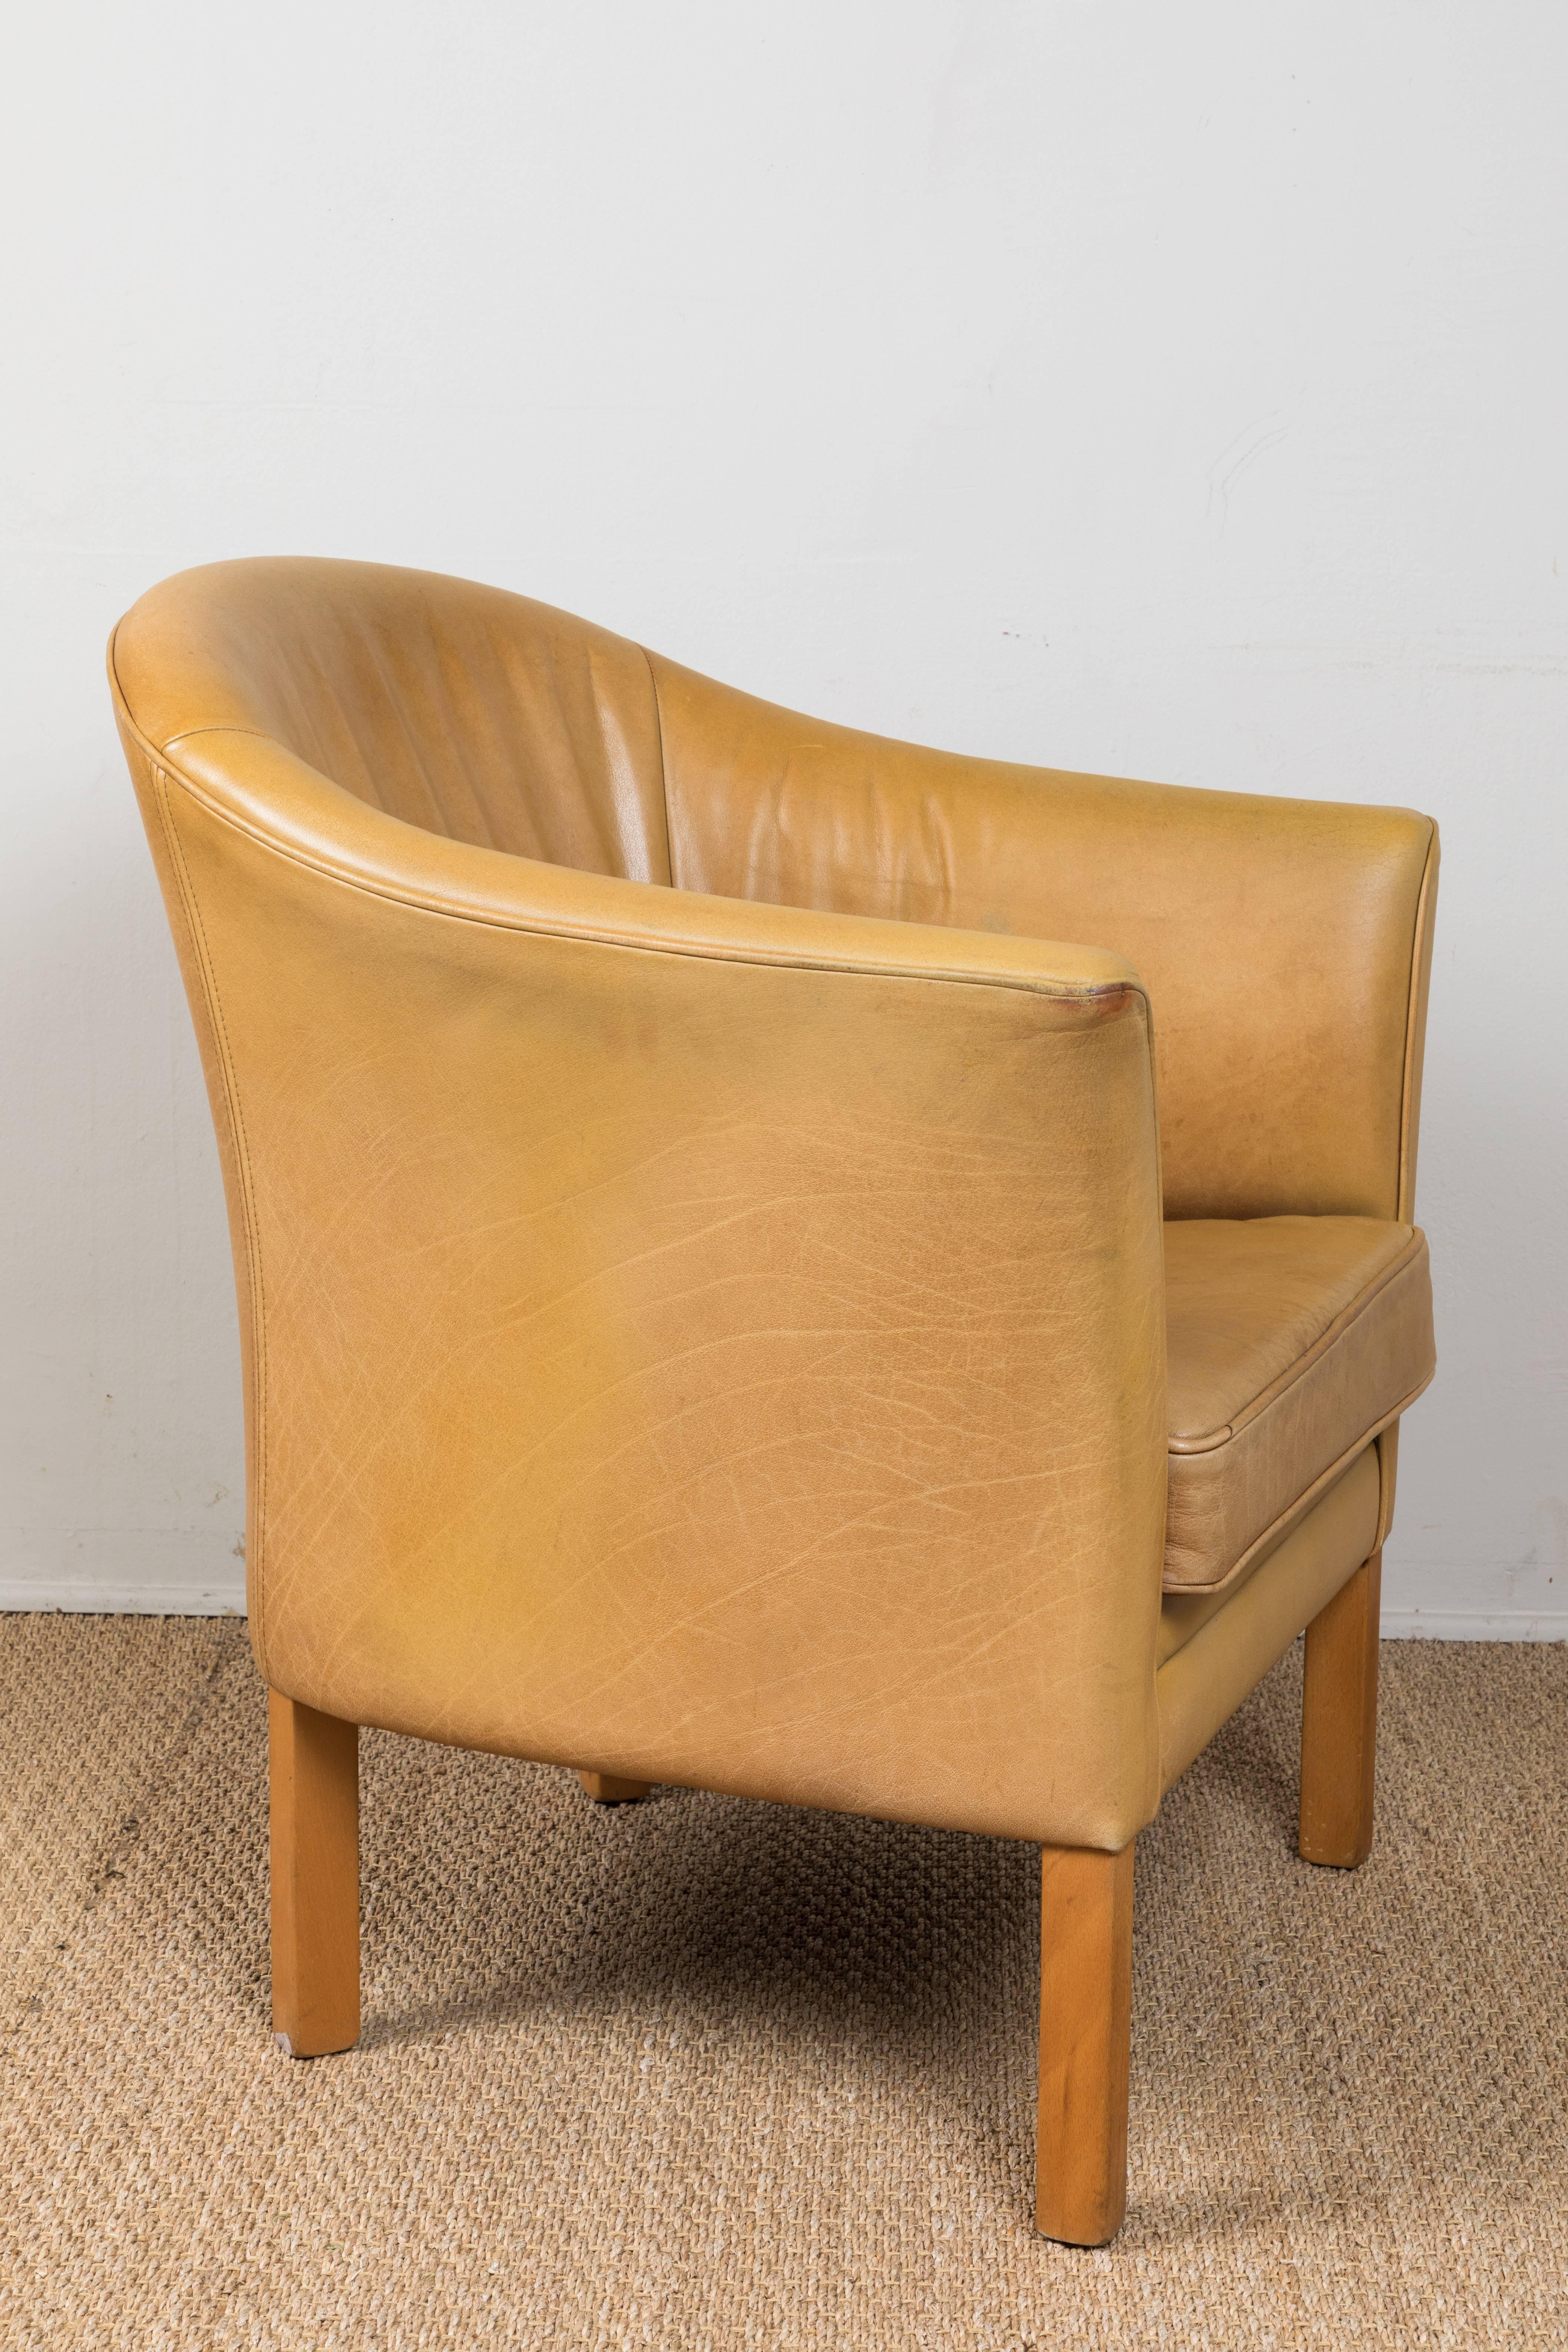 Vintage Leather Occasional Chairs In Good Condition For Sale In Los Angeles, CA